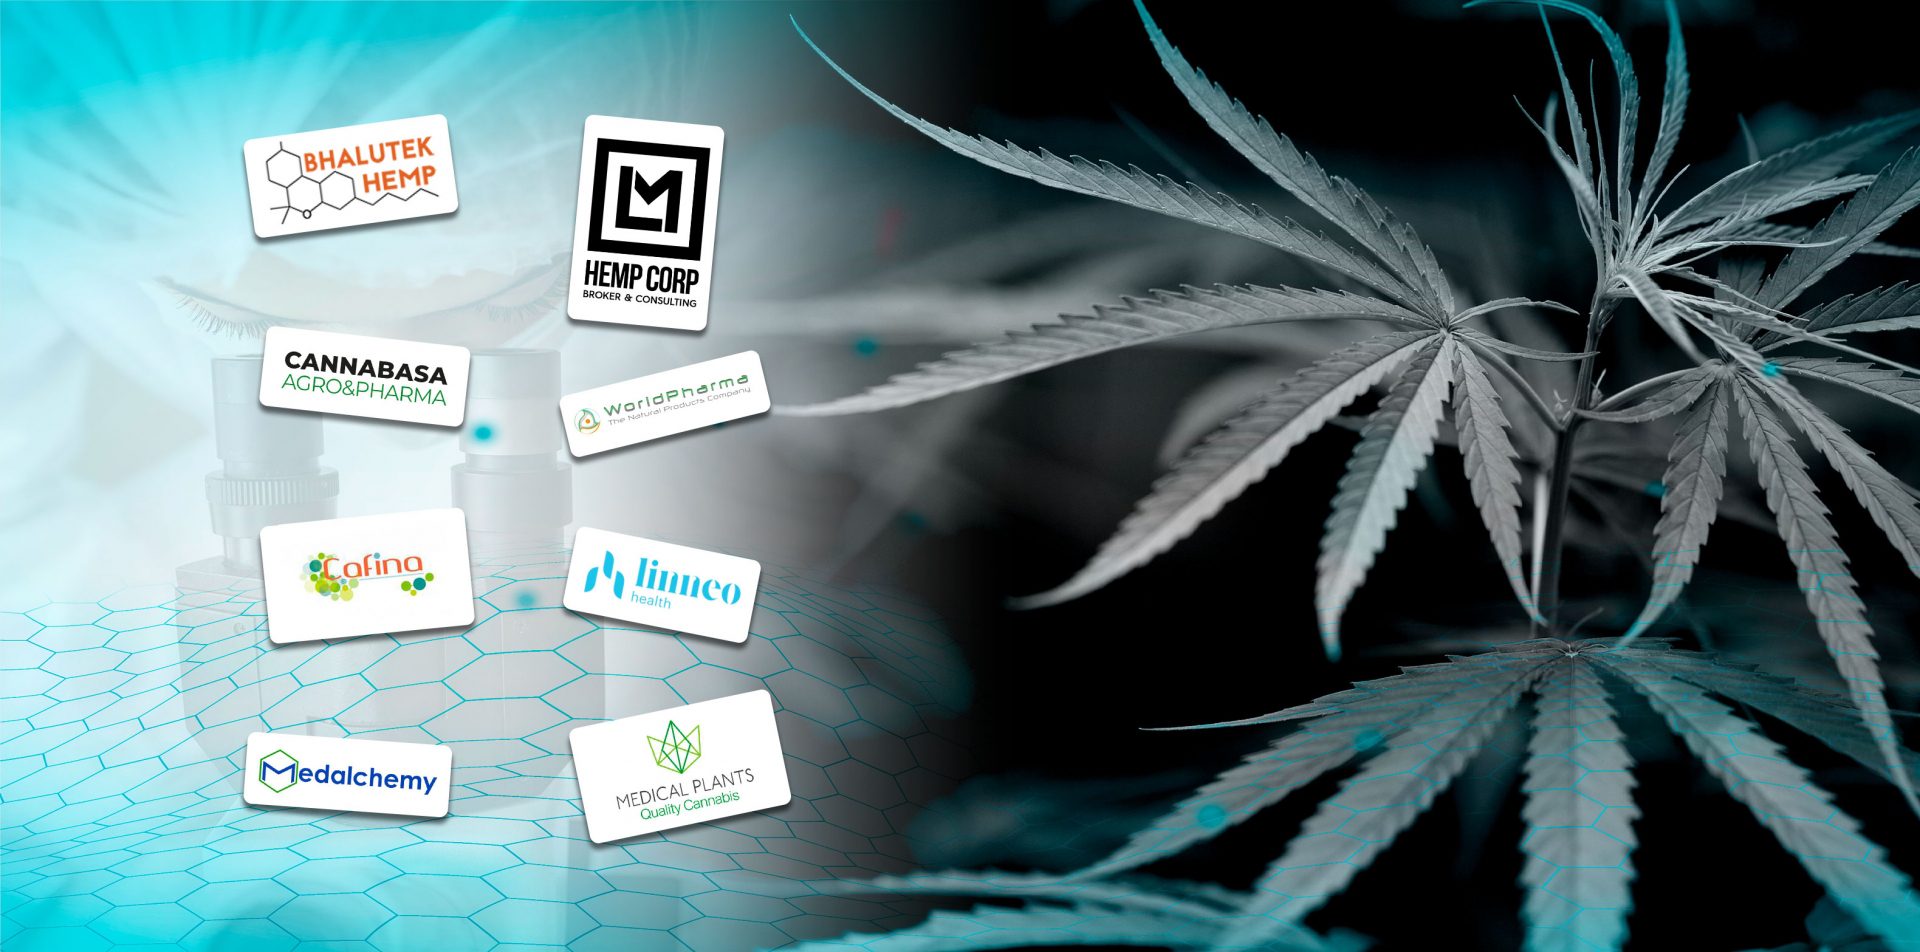 What are the 22 companies that can currently grow or produce cannabis in Spain?